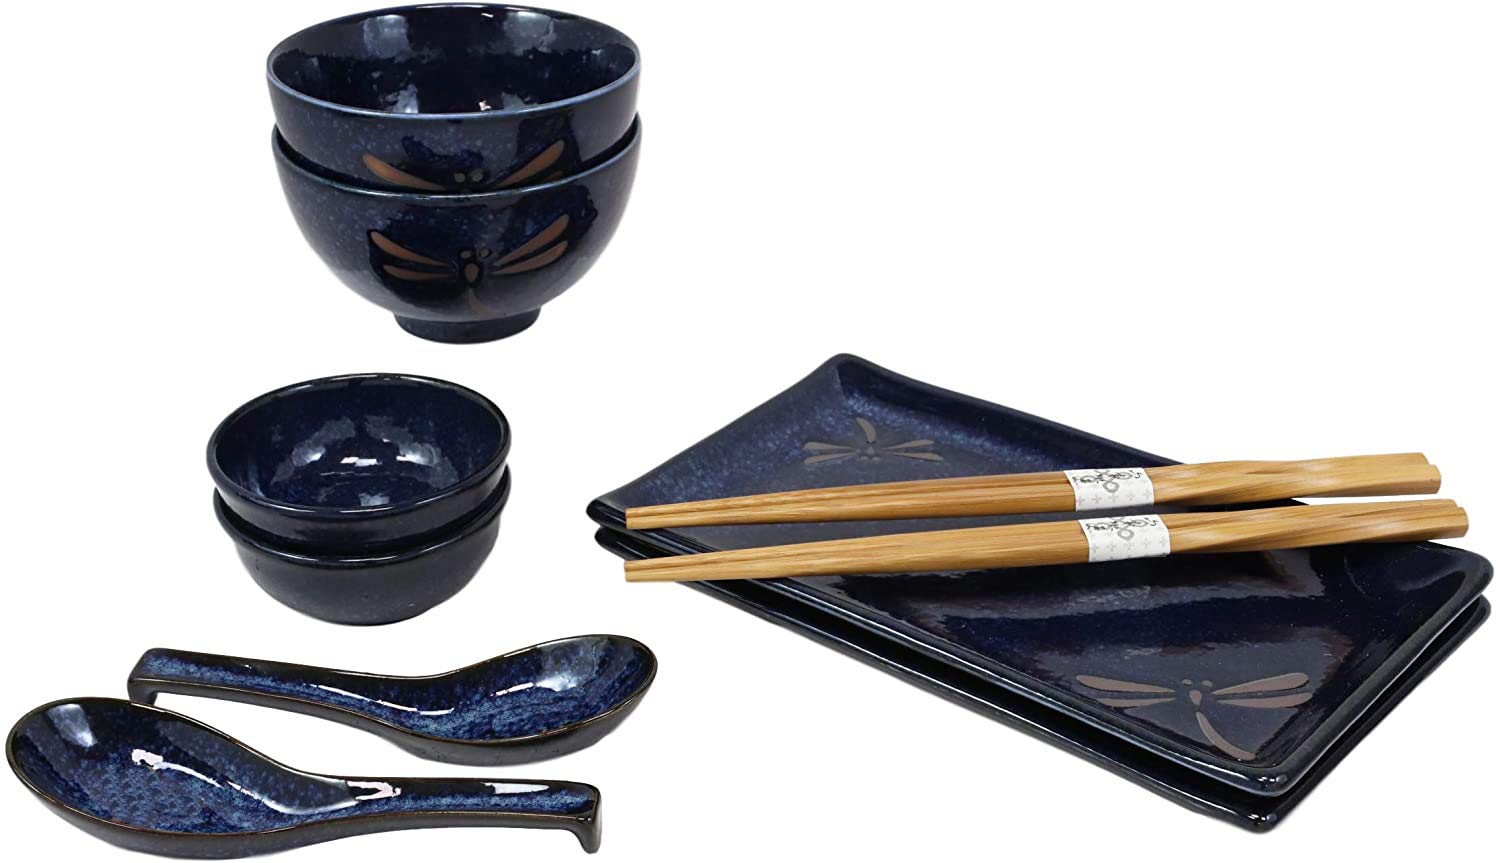 Ebros Gift Japanese Mino Ware Tombo Dragonfly Blue Porcelain Sushi Dinnerware 10pc Set For 2 People Pairs of Sushi Plates Soup And Sauce Bowls Bamboo Chopsticks Asian Soup Spoons Housewarming Gift